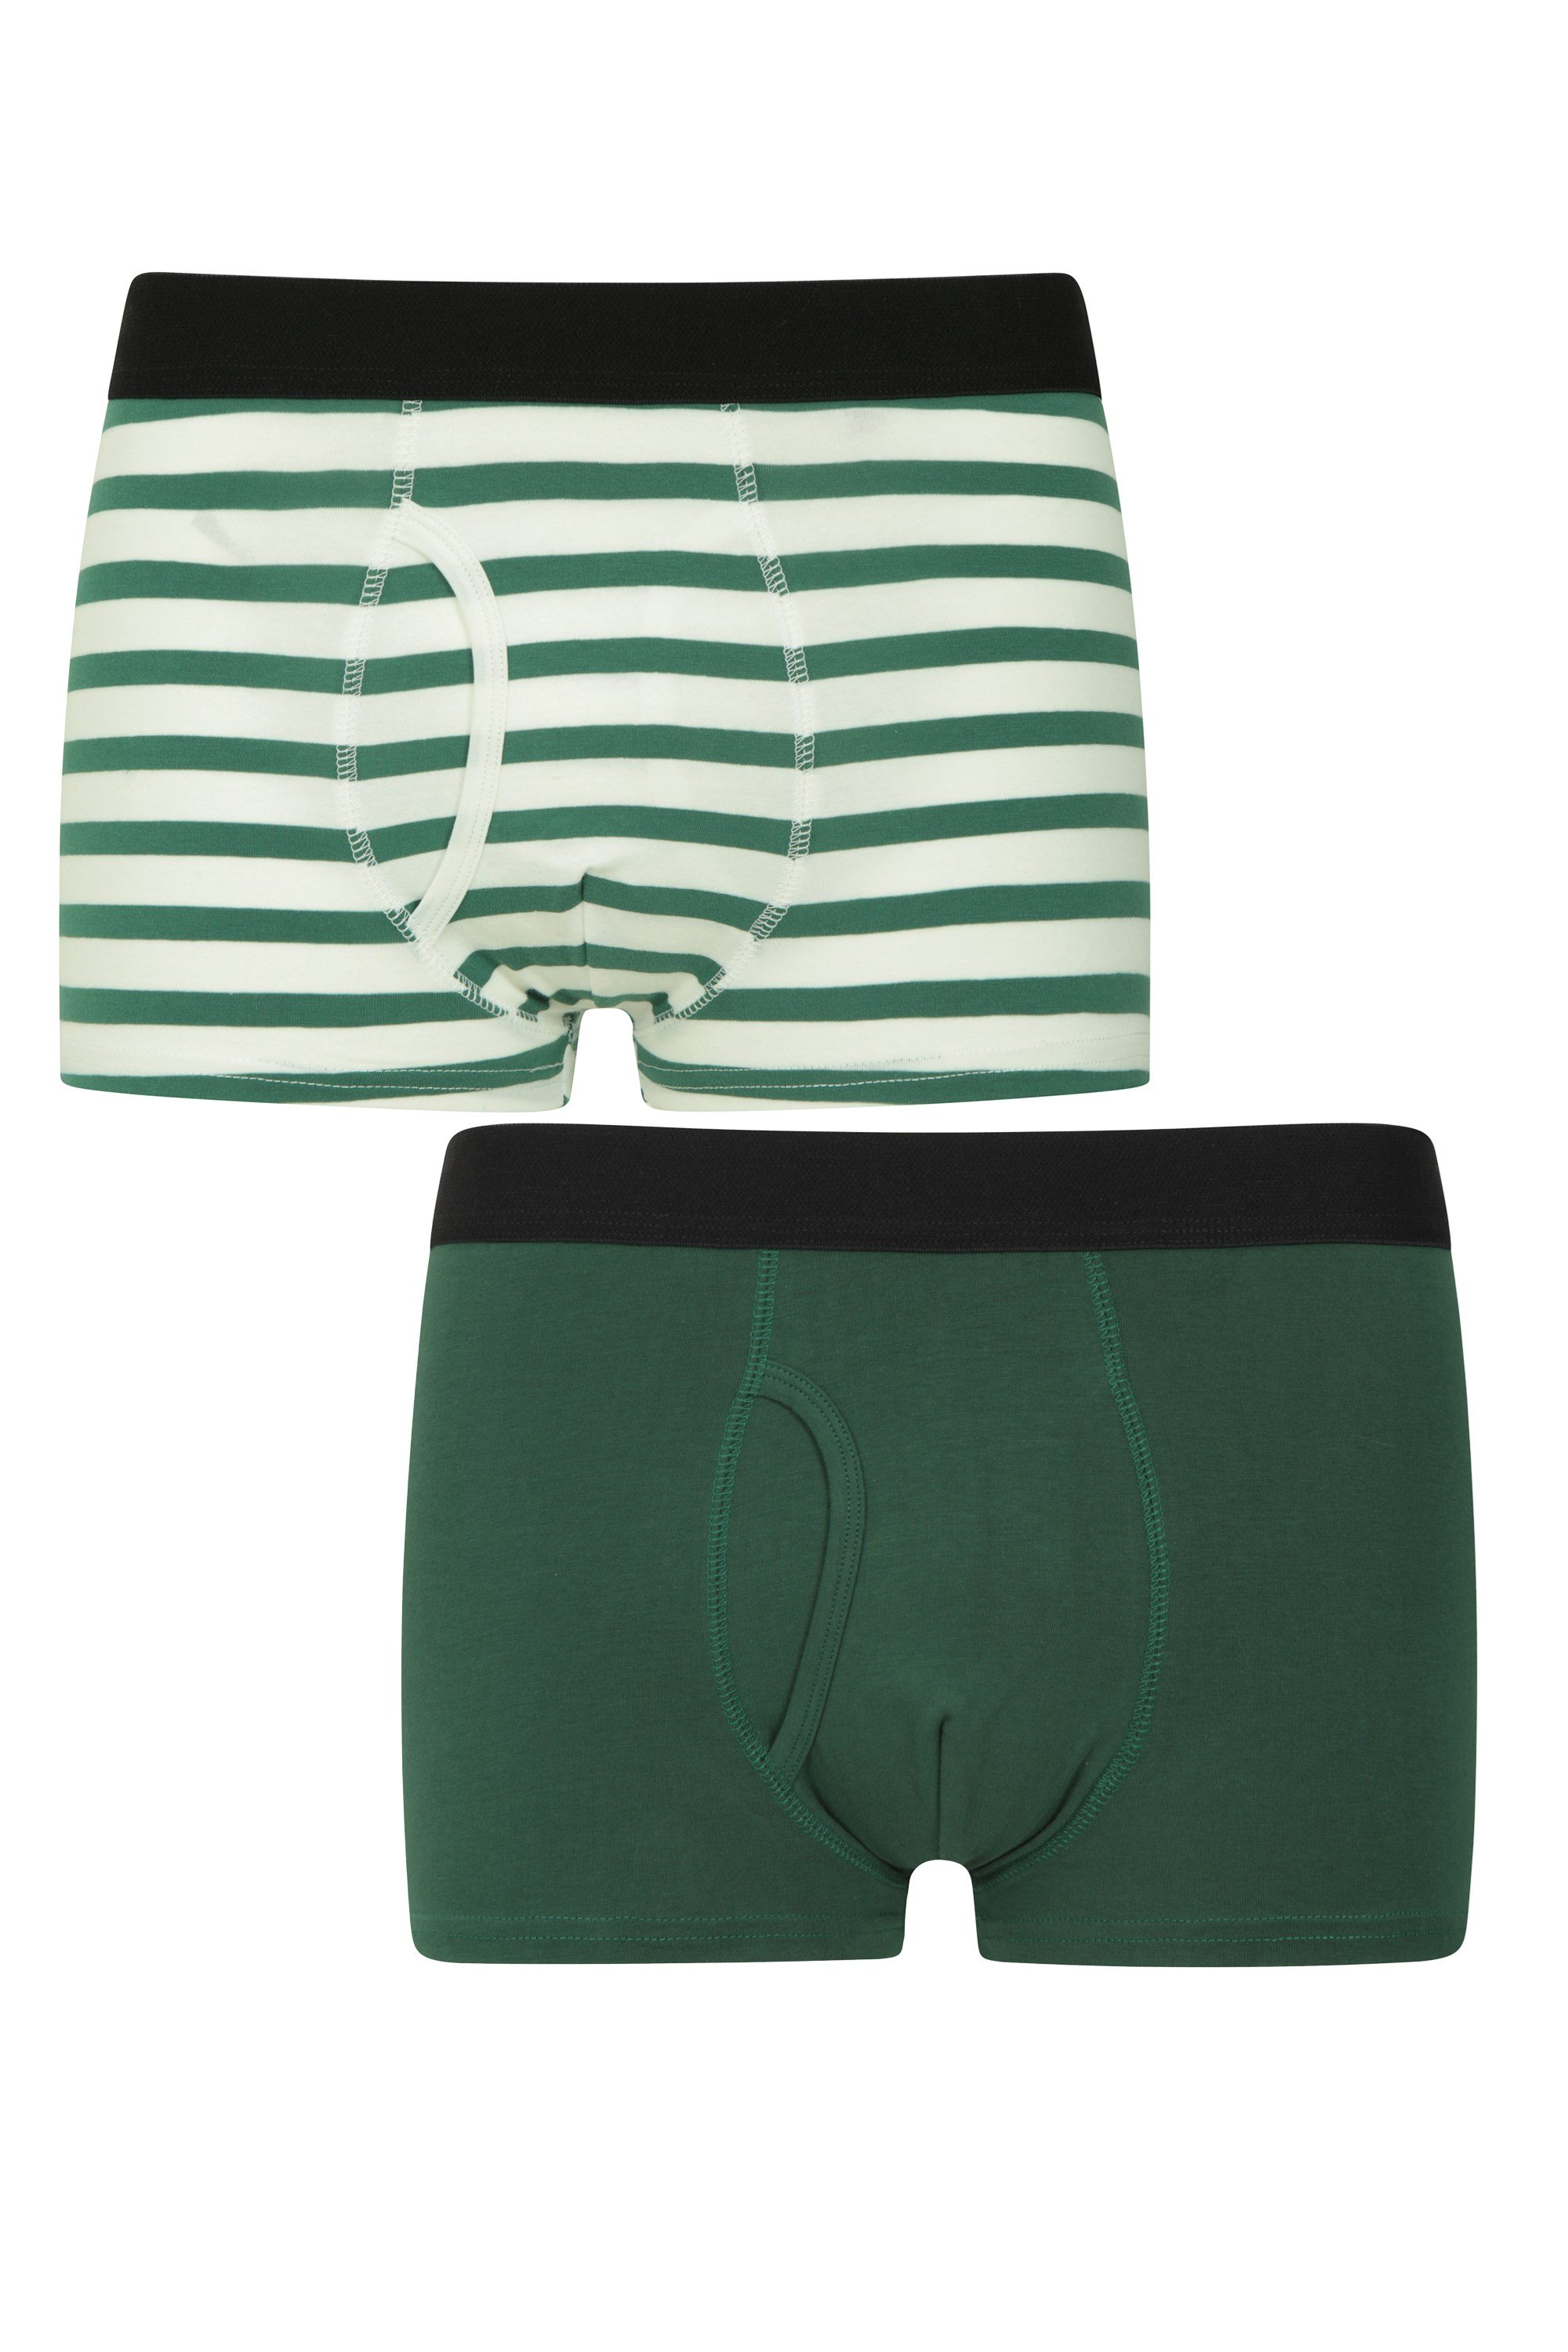 Mens Striped Boxers 2-pack - Green